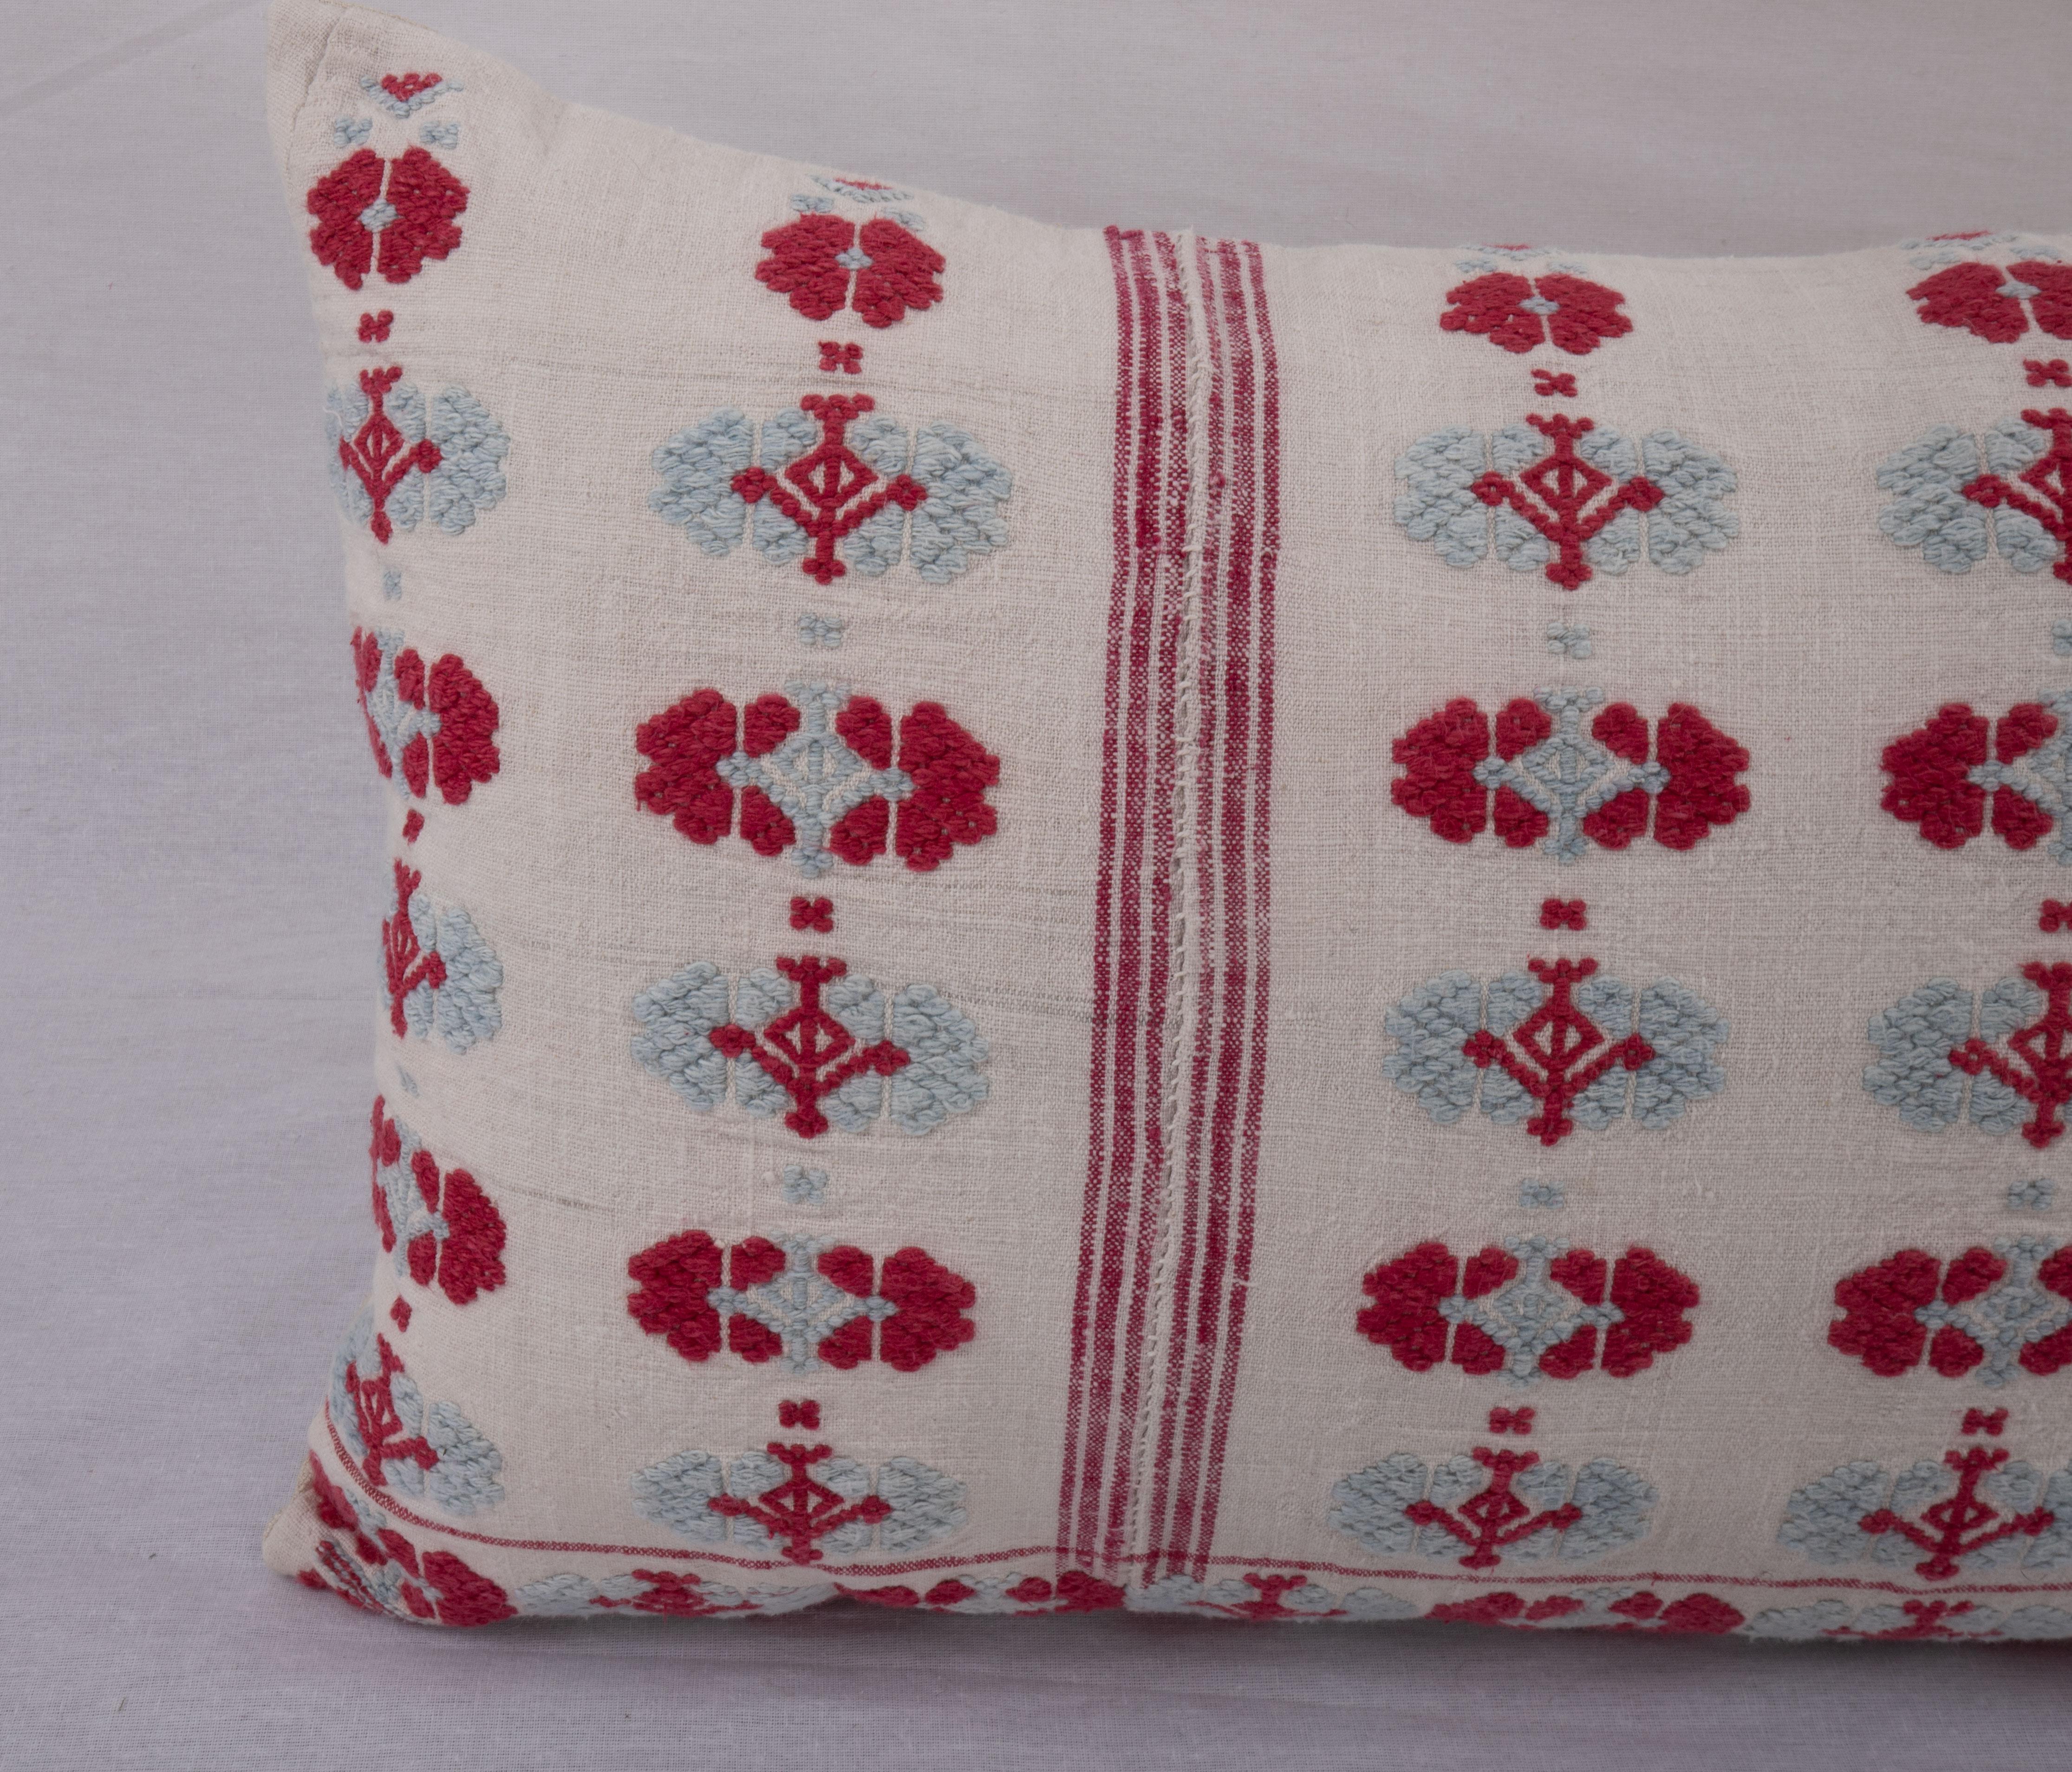 Rustic Pillow Cover Made from an Anatolian Embroidered Skirt, 2nd Quarter 20th C. For Sale